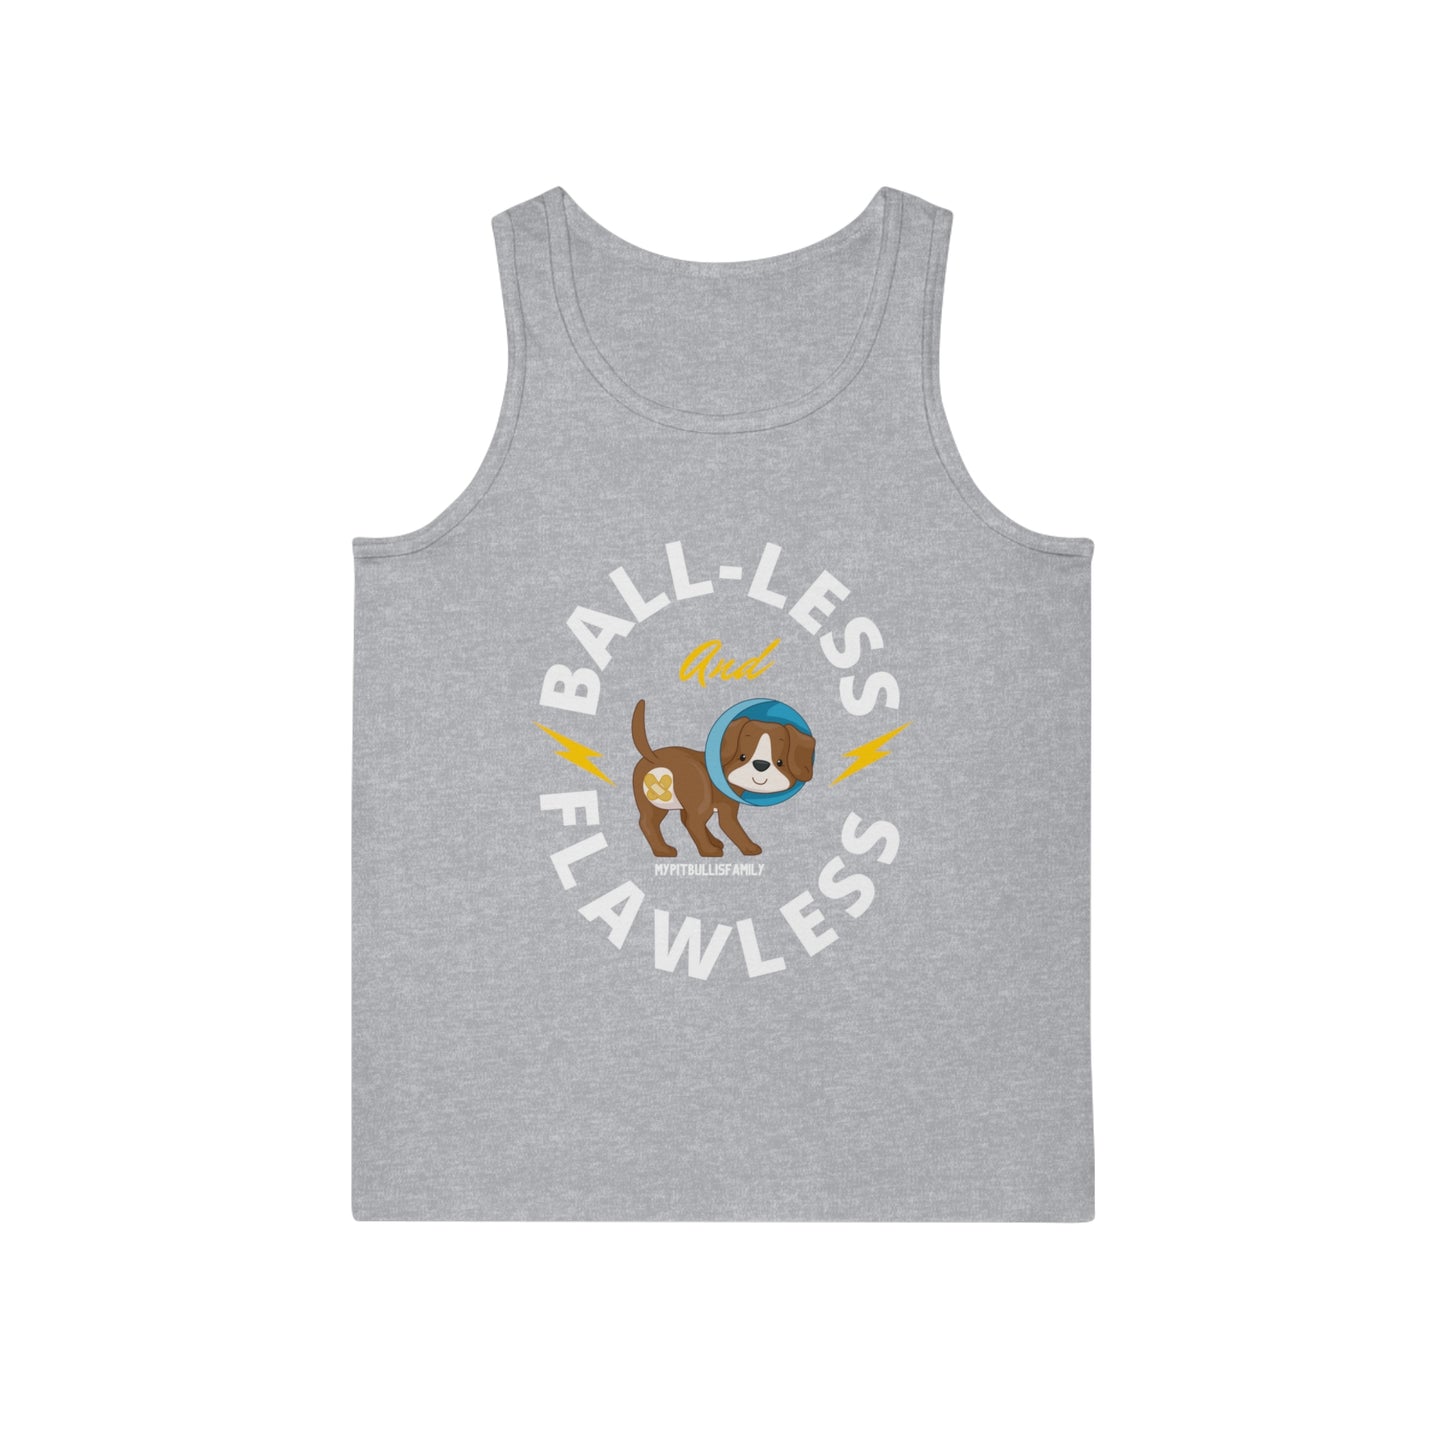 Ball-less & Flawless Unisex Softstyle™ Tank Top